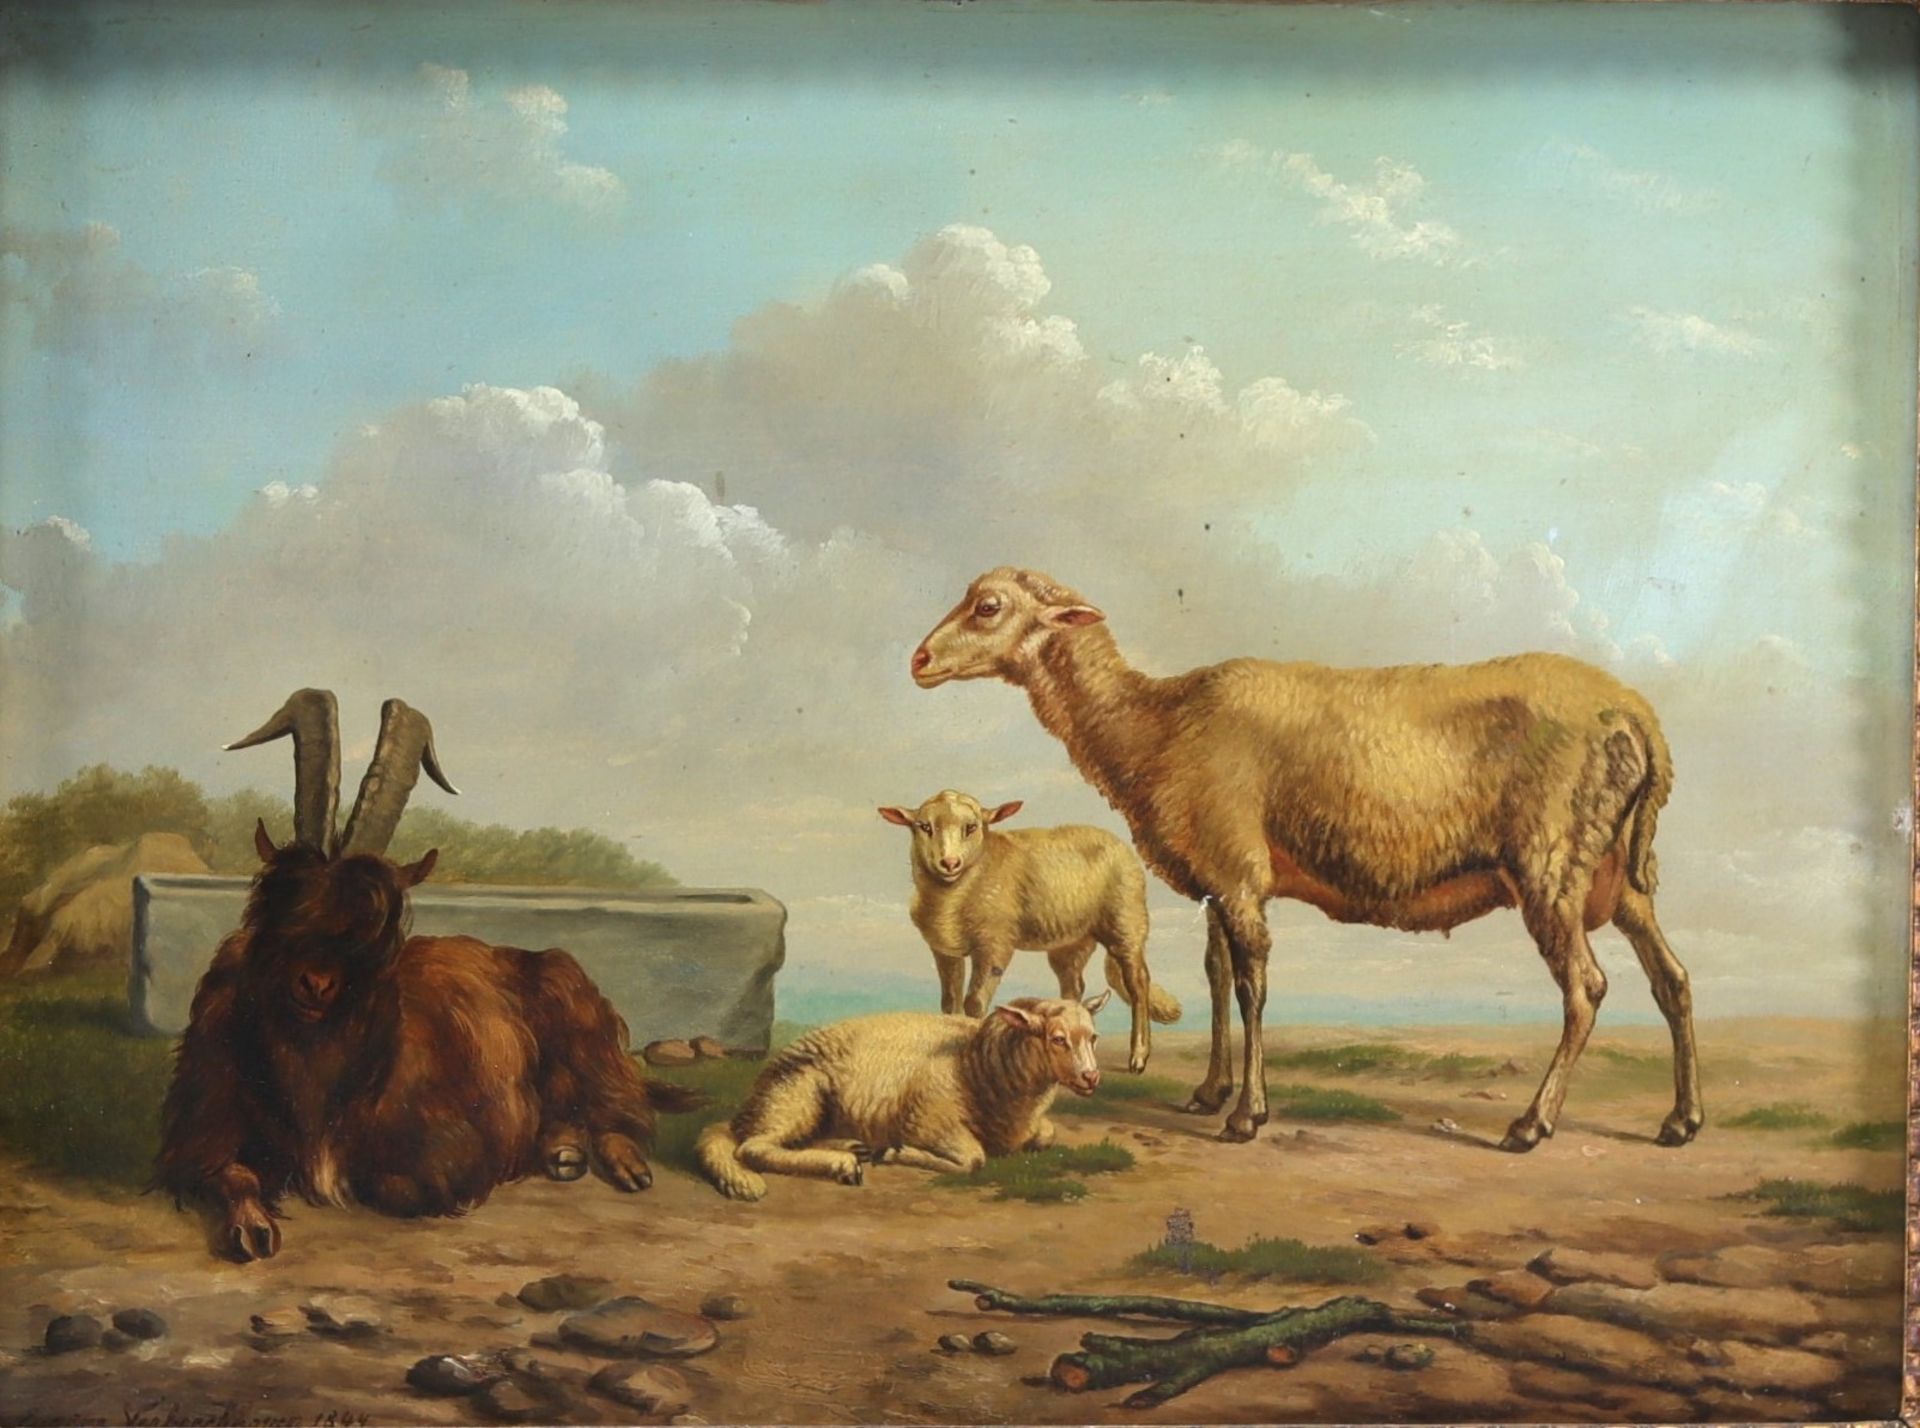 Eugene VERBOECKHOVEN (1798/99-1881) "Sheep and goats" Oil on panel.